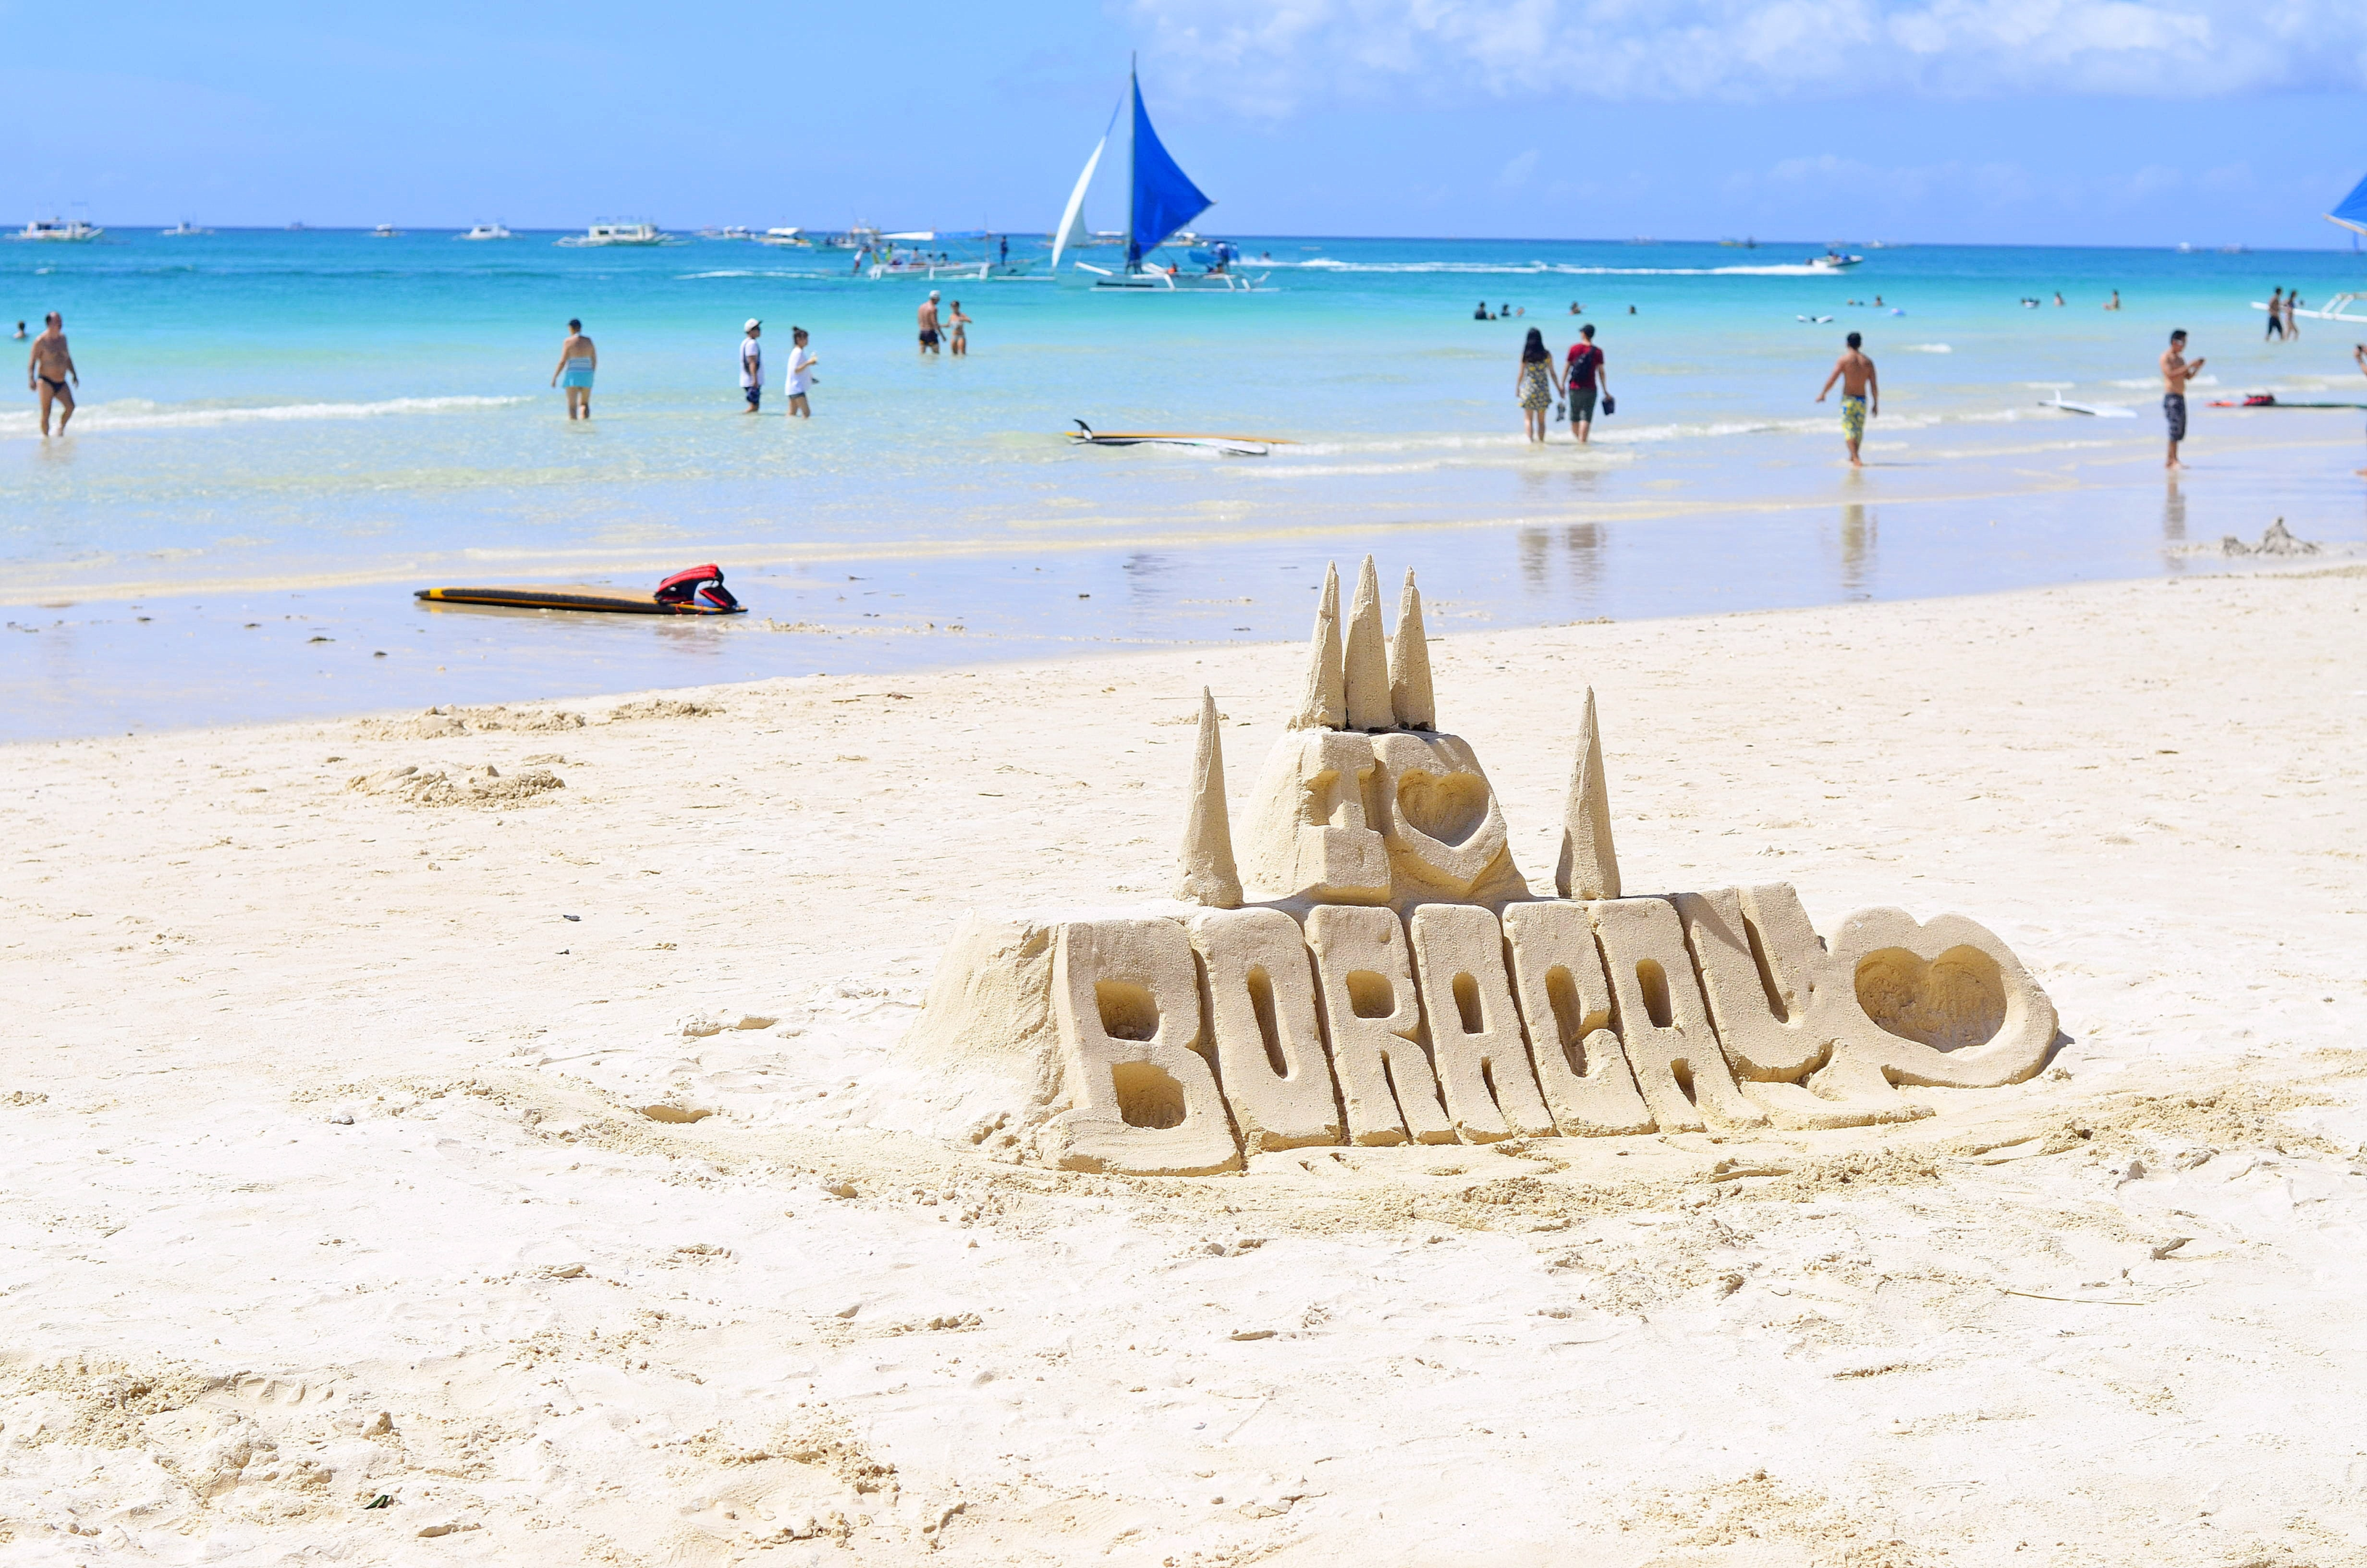 Gushing over the powdery white sand alone can be one of your good reasons to visit Boracay. 